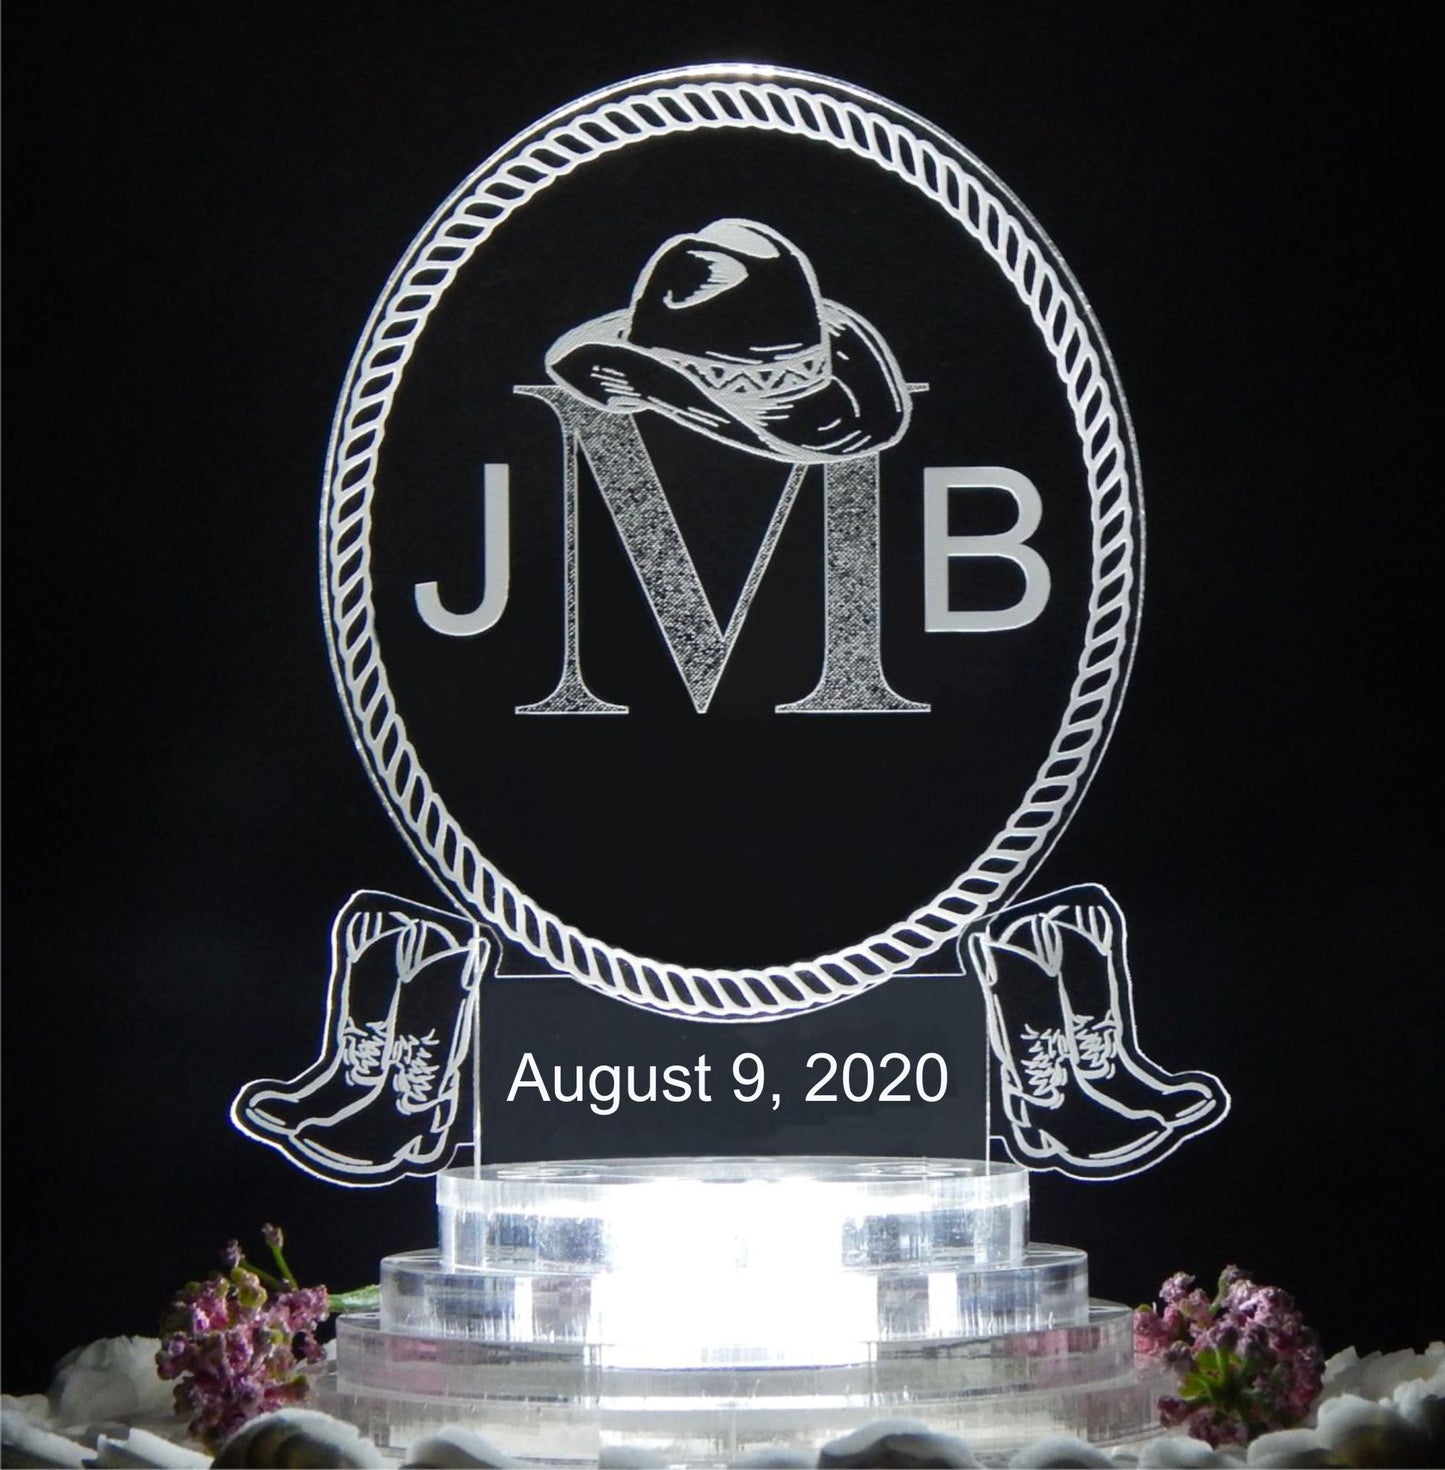 clear acrylic oval cake topper designed in a western cowboy theme engraved with a 3 letter monogram and date